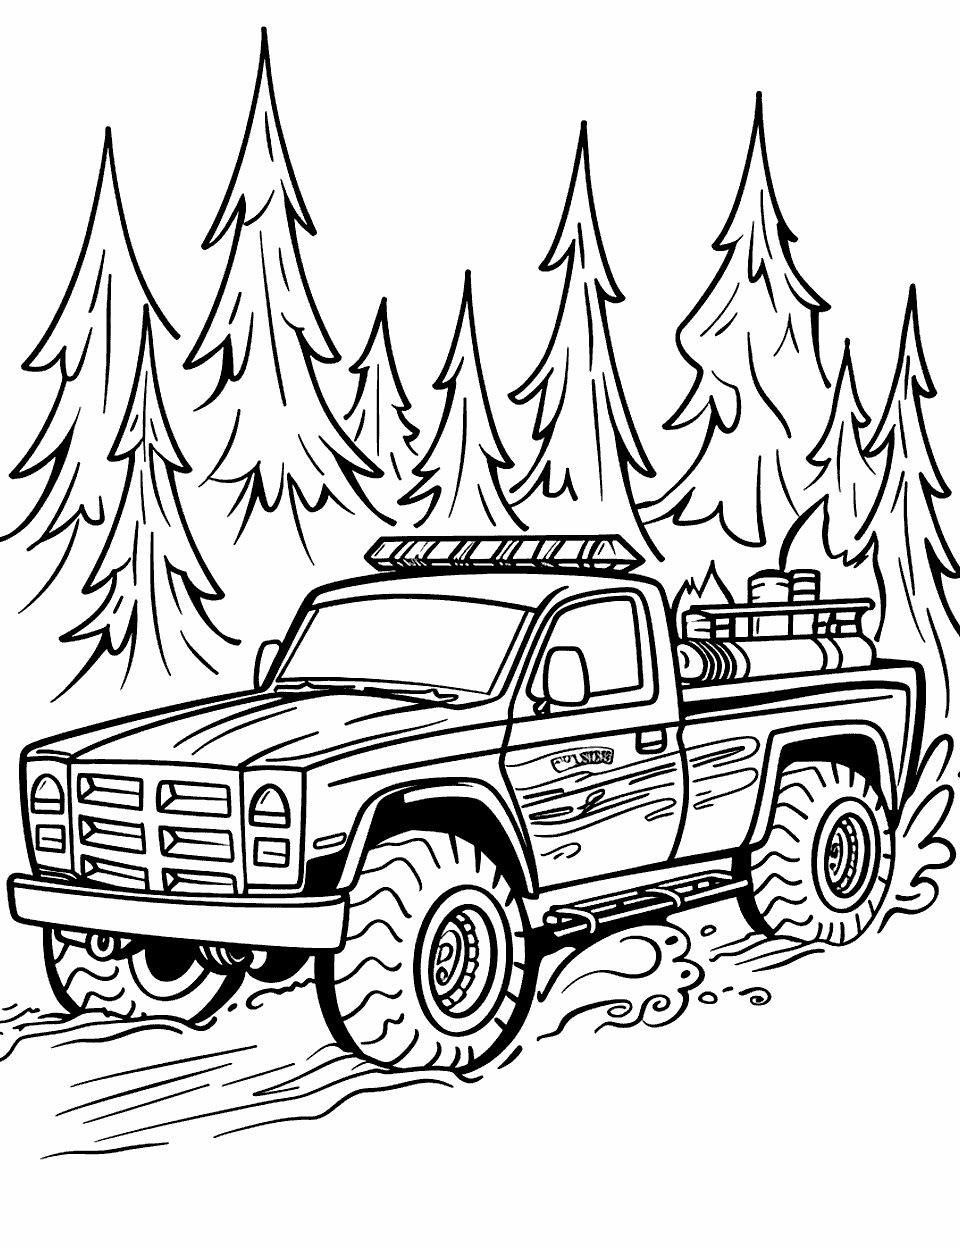 Forest Fire Rescue Coloring Page - A Hot Wheels fire truck racing to a forest fire.